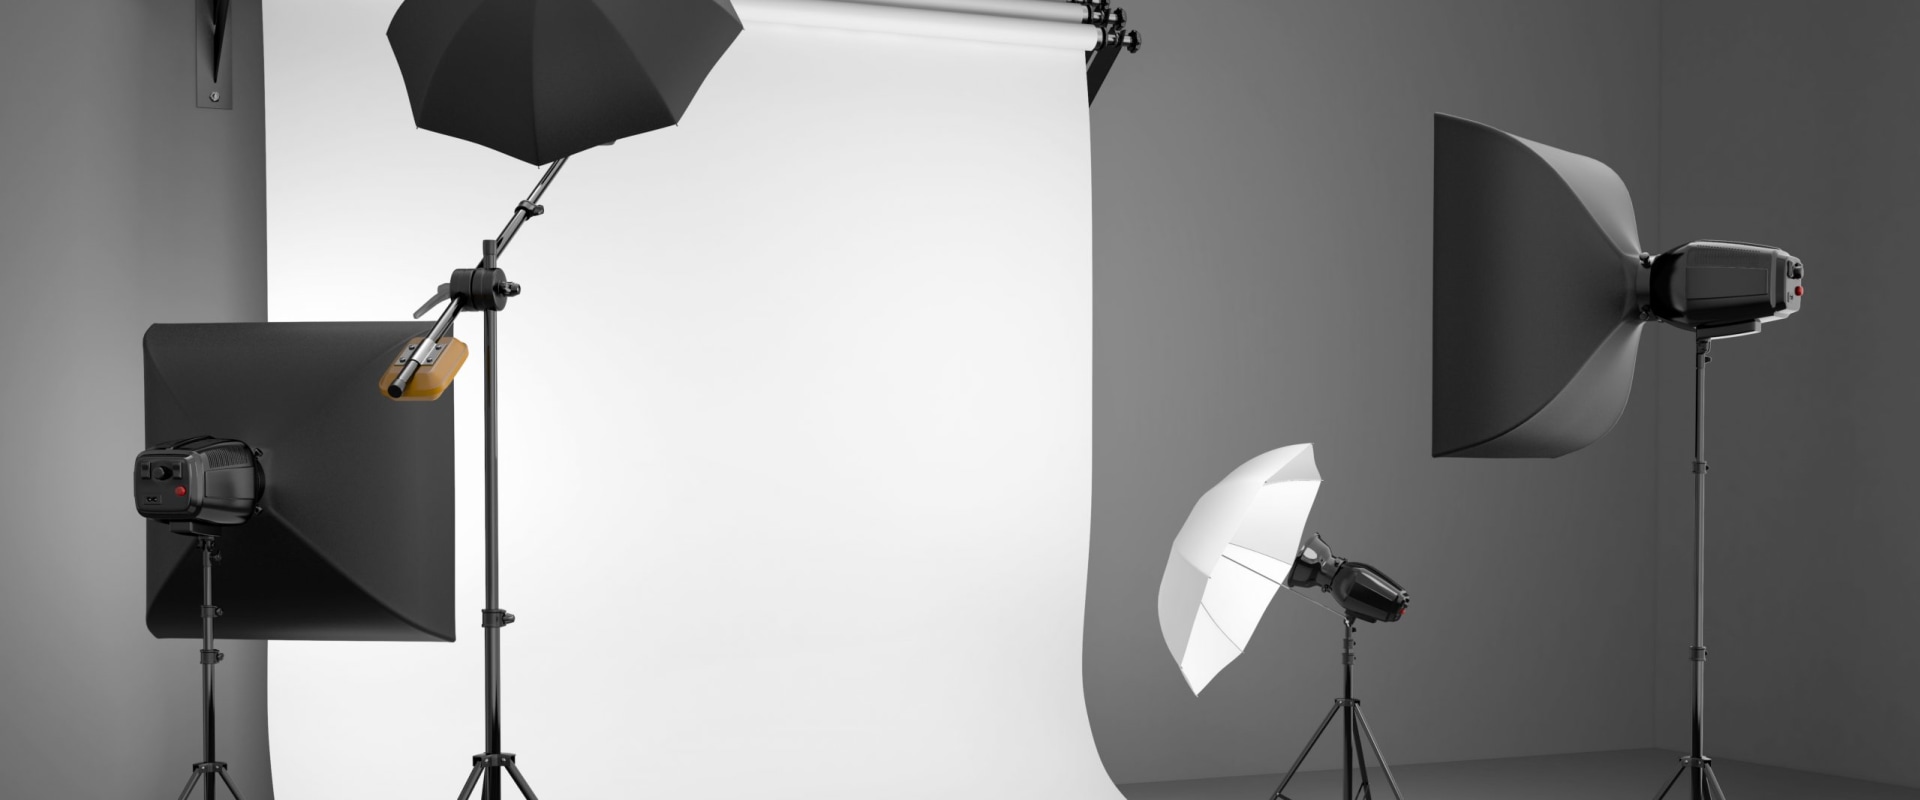 The Best Lighting Configuration for Product Photography